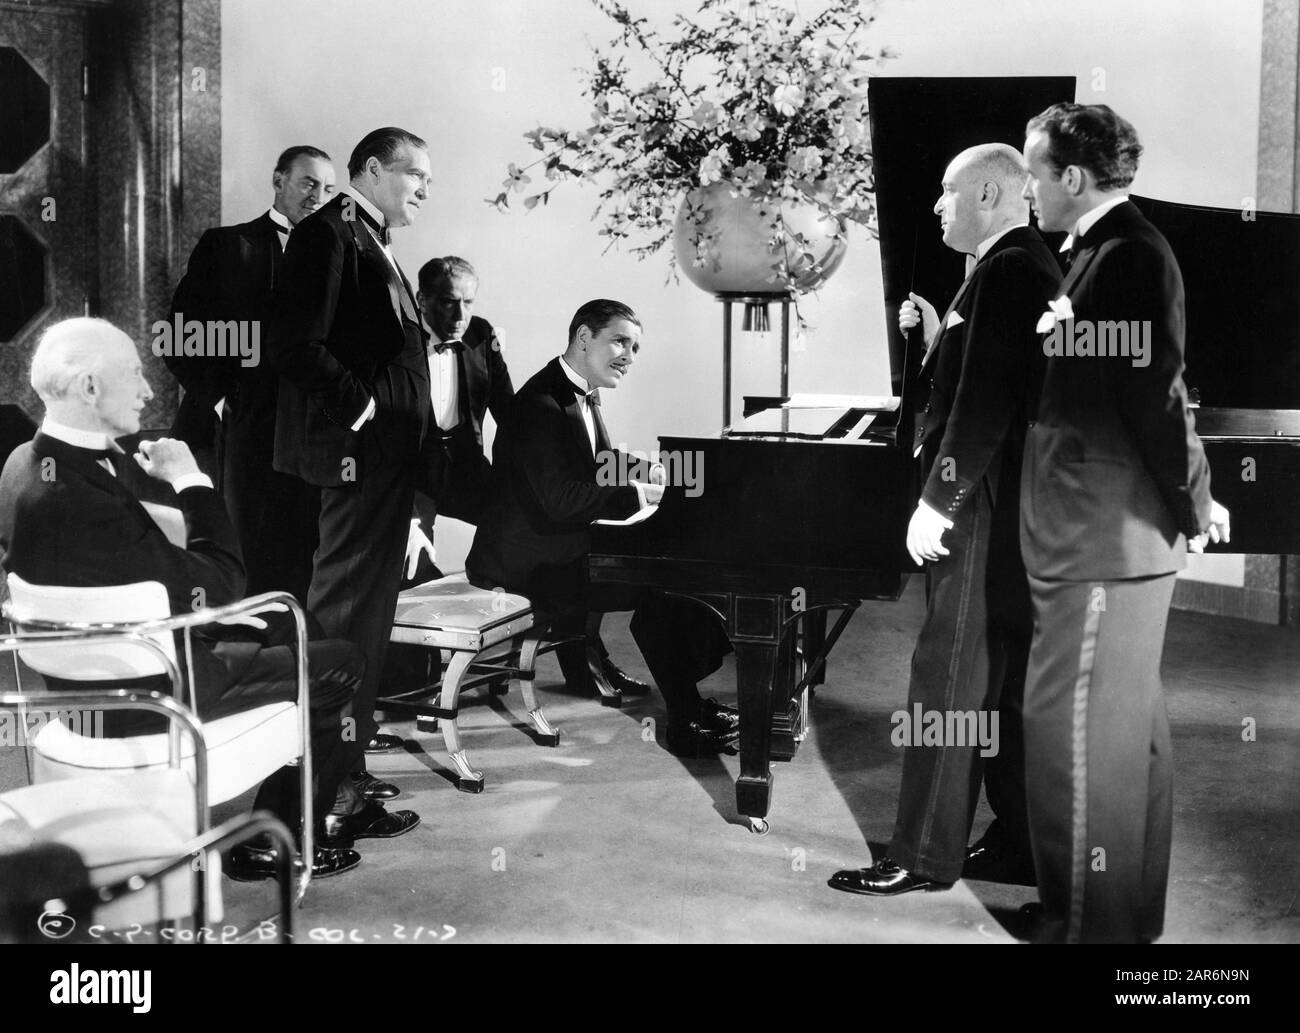 HUGH BUCKLER as Lord Gainsford standing to left of RONALD COLMAN as Robert Conway in cut scene from LOST HORIZON 1937 director FRANK CAPRA novel JAMES HILTON screenplay ROBERT RISKIN Columbia Pictures Stock Photo